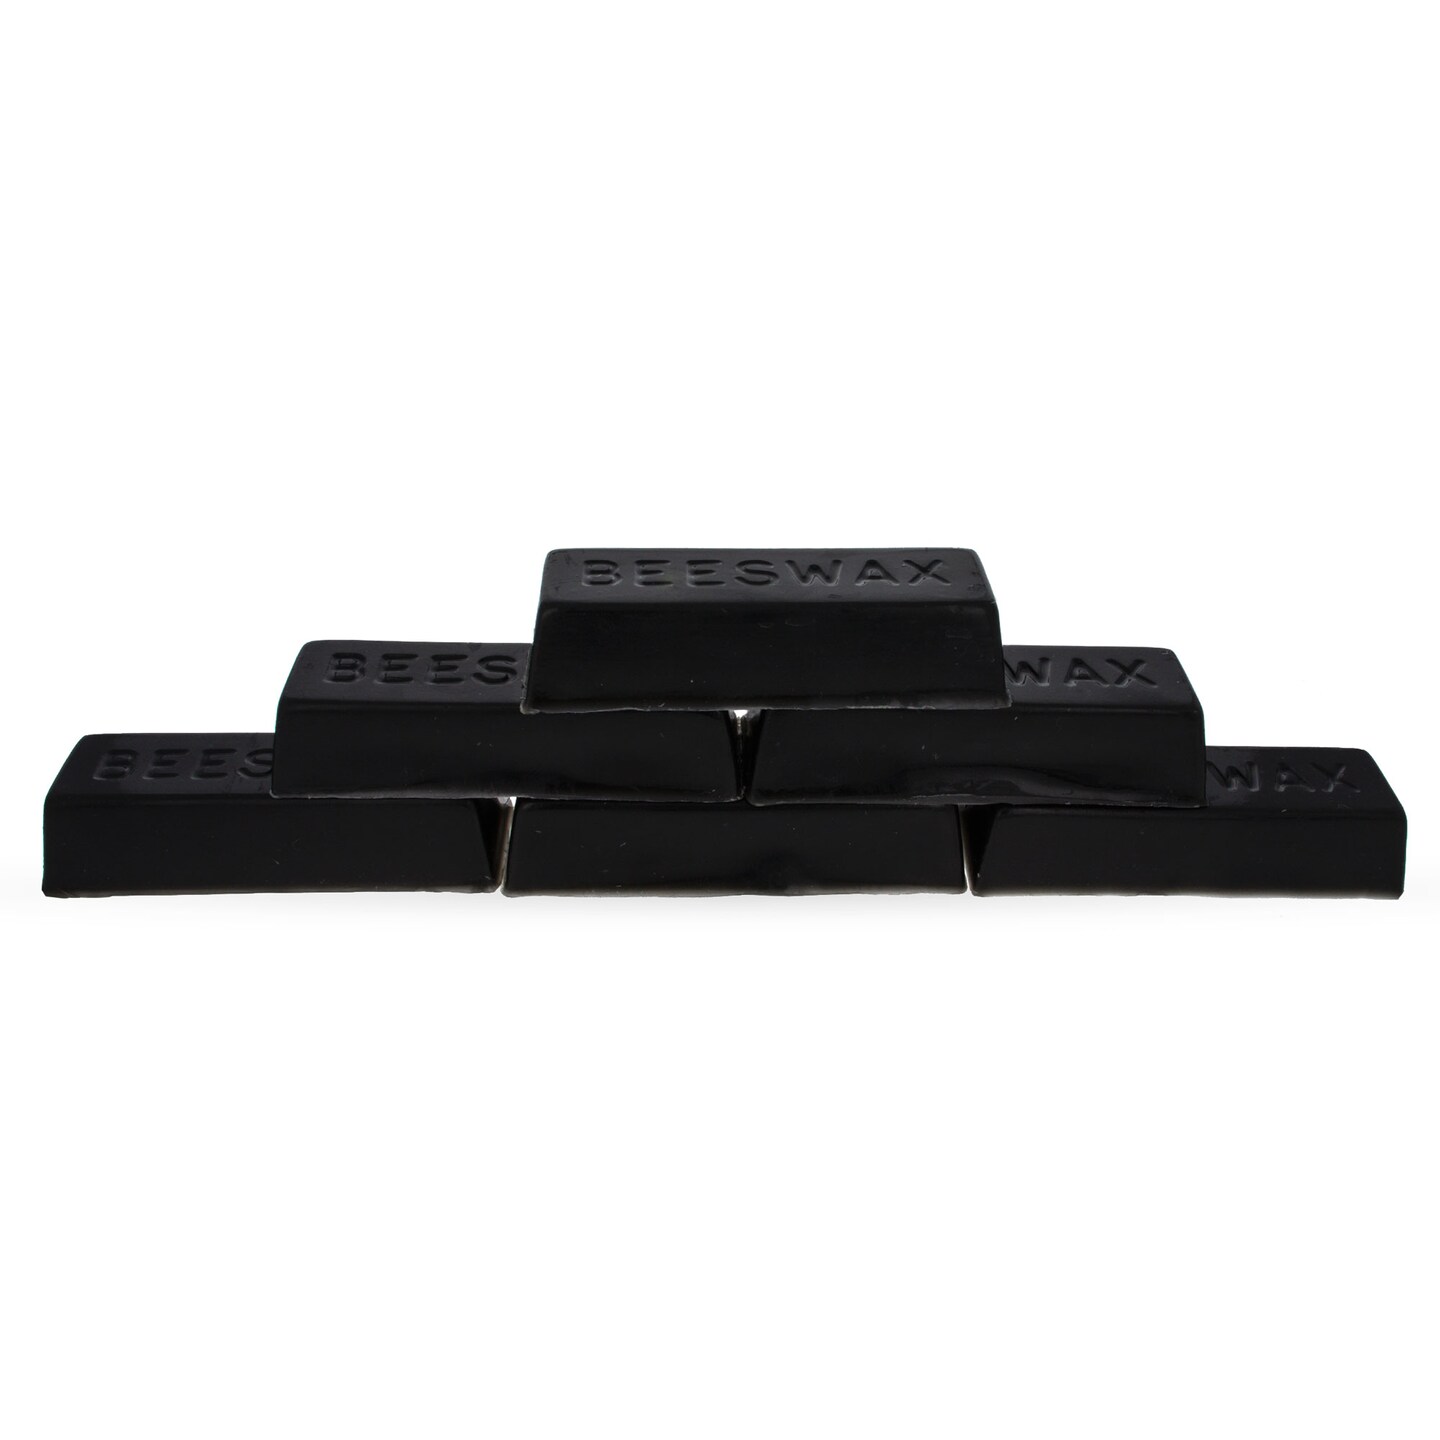 Set of 6 Black Triple Filtered Rectangle Beeswaxes 6 oz